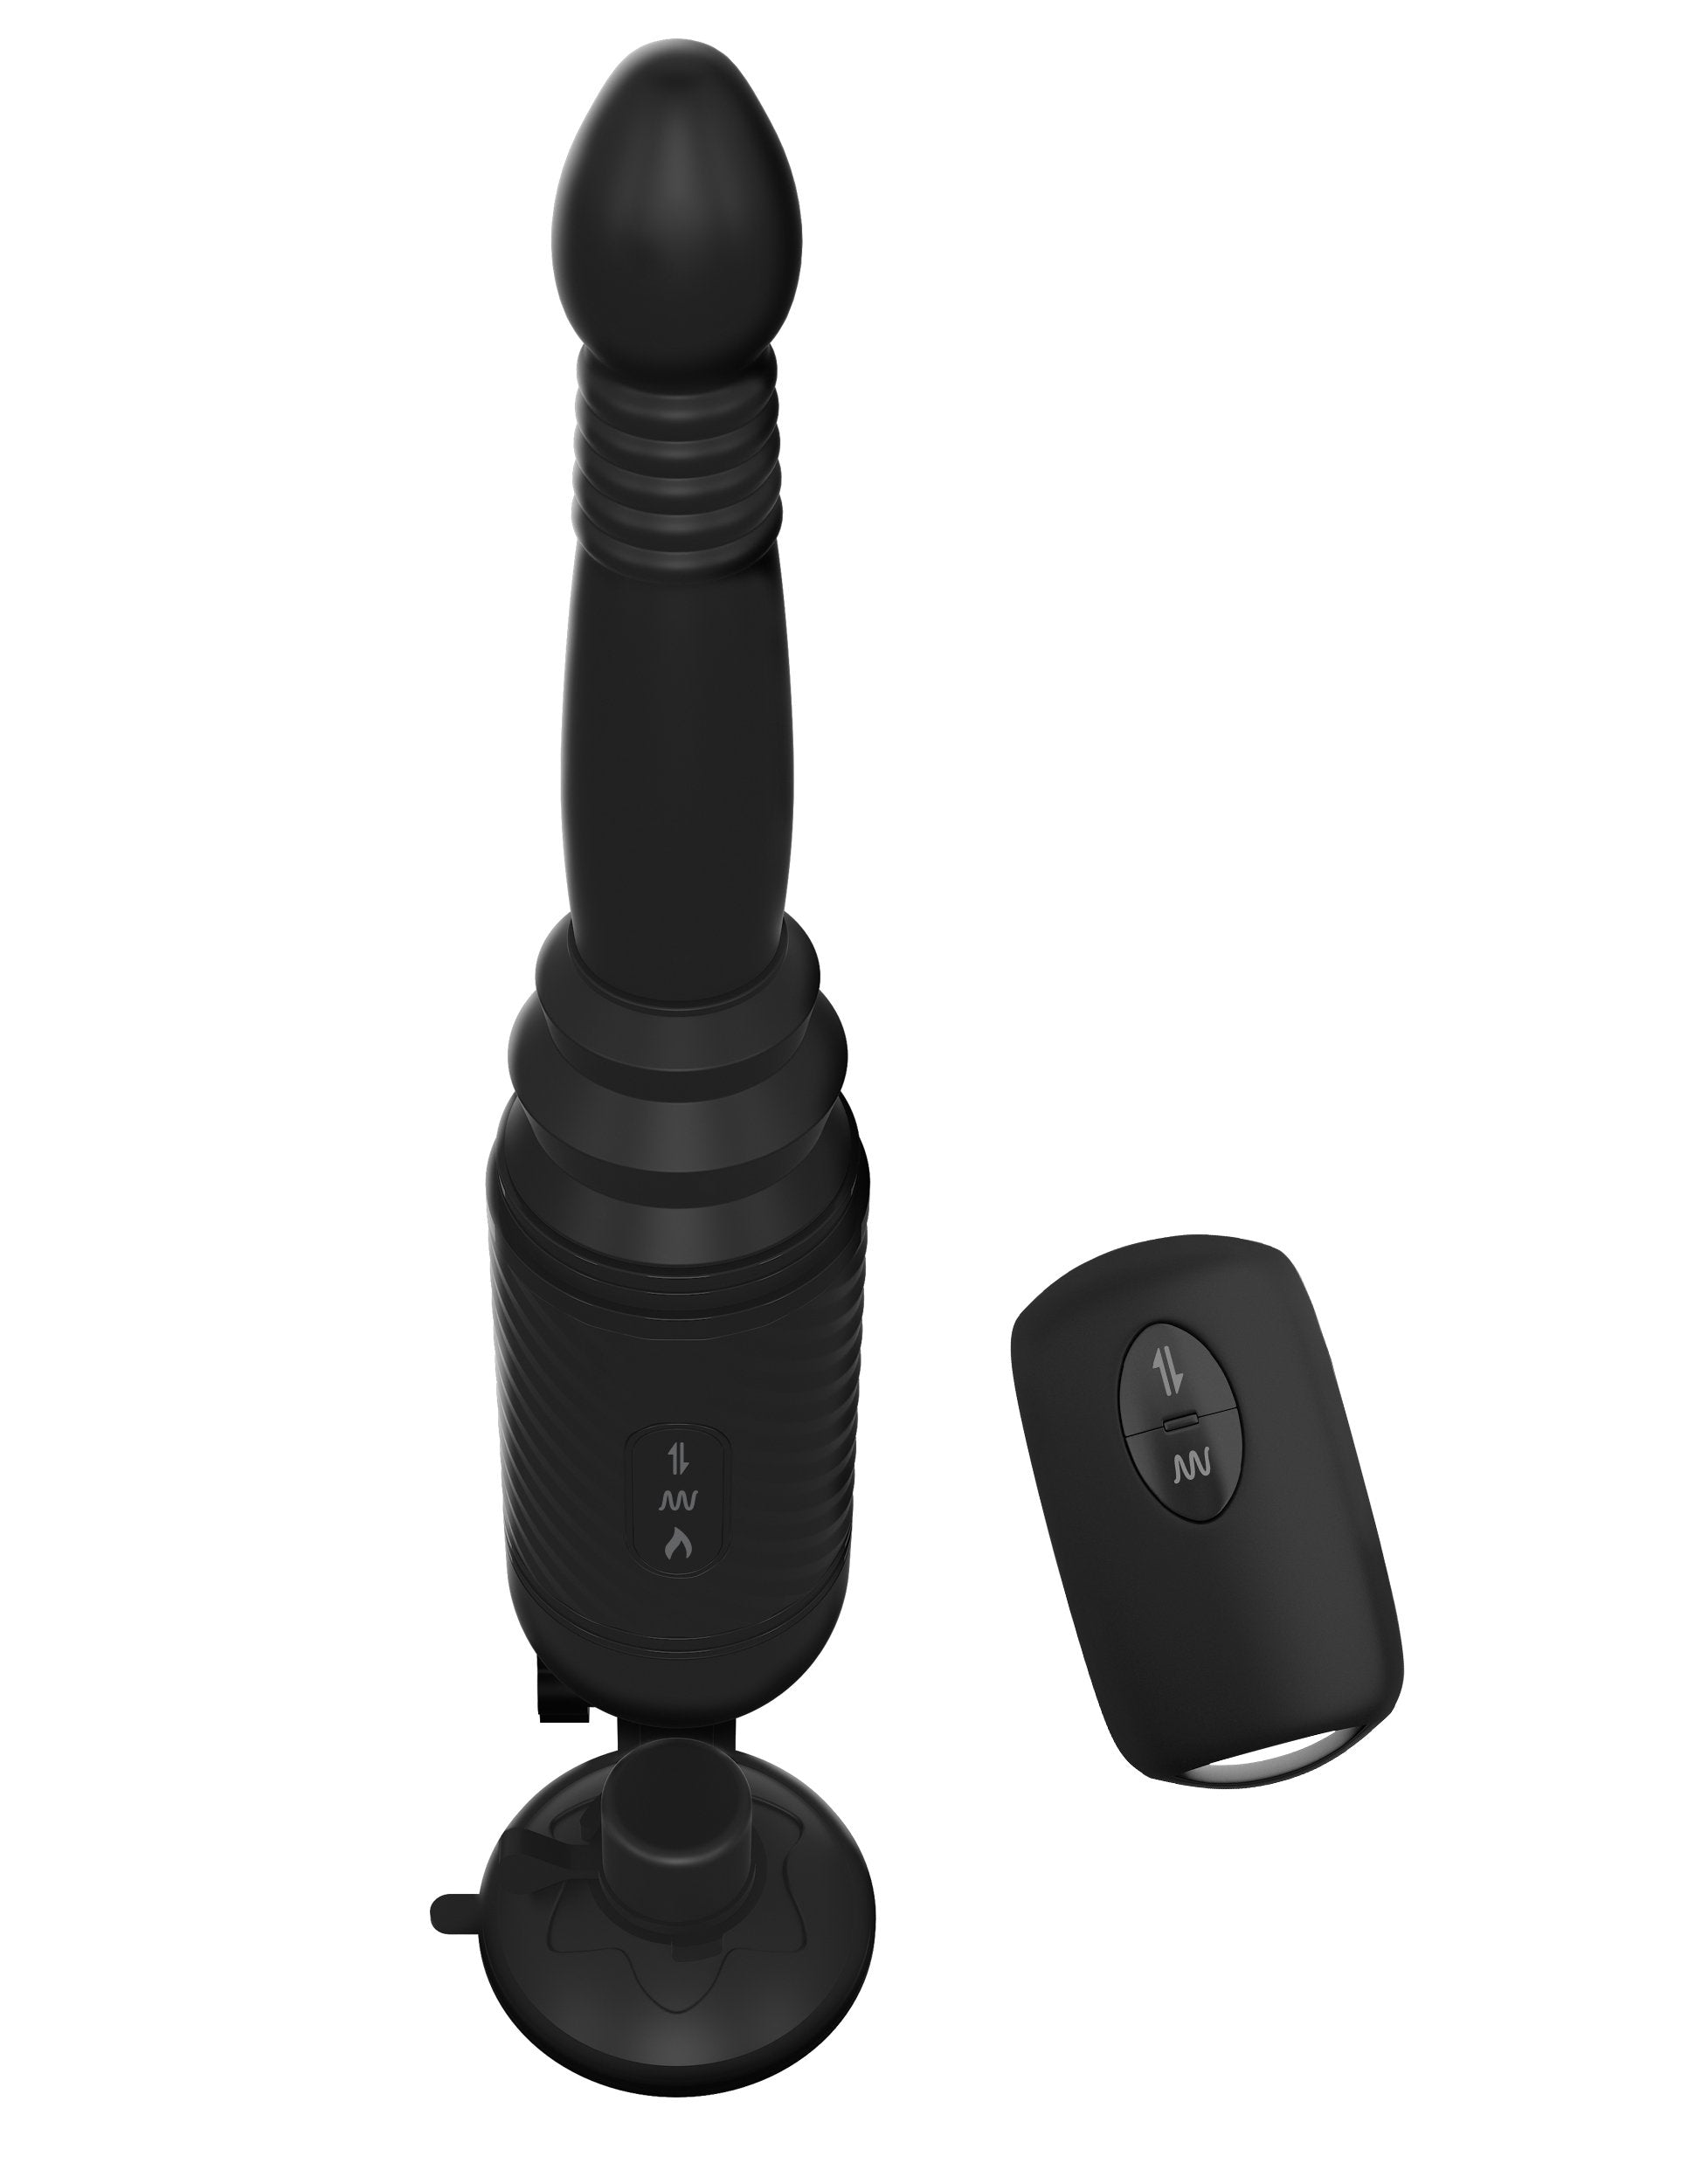 Anal Fantasy Elite Silicone Heating Vibrating Remote Control Ass Thruster by Pipedream